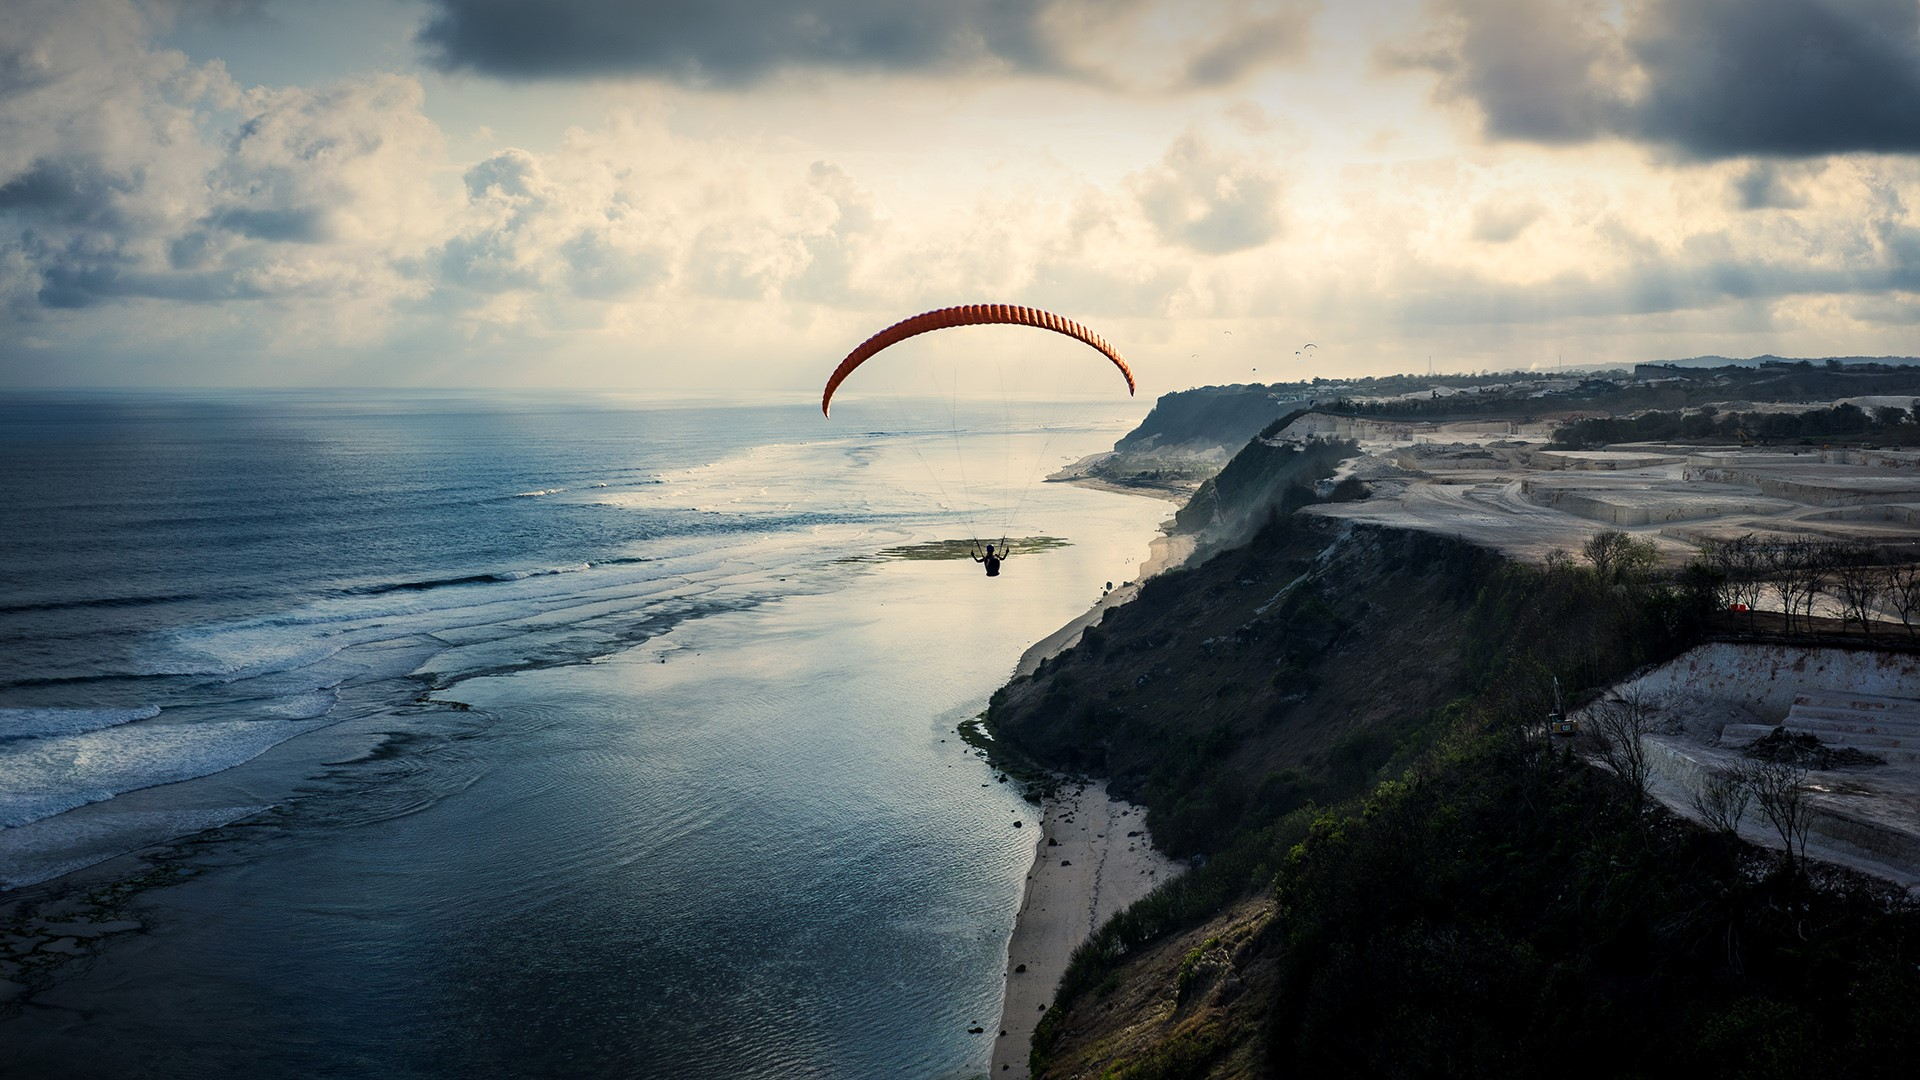  Paragliding  HD Wallpaper  Background Image 1920x1080